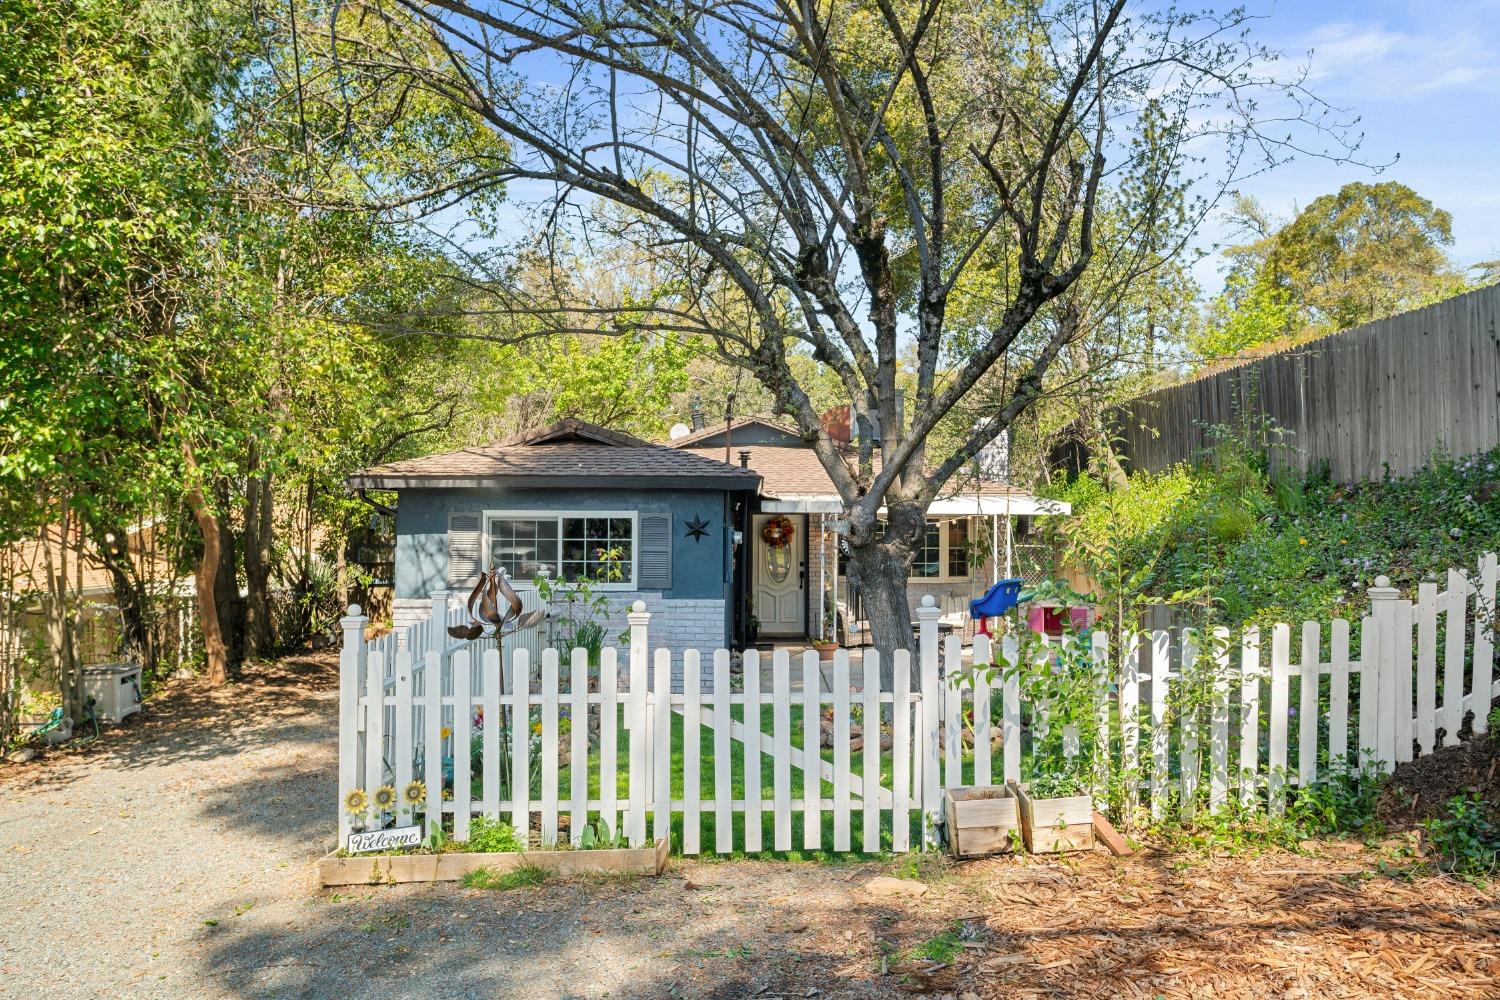 Photo of 110 Cary Dr in Auburn, CA